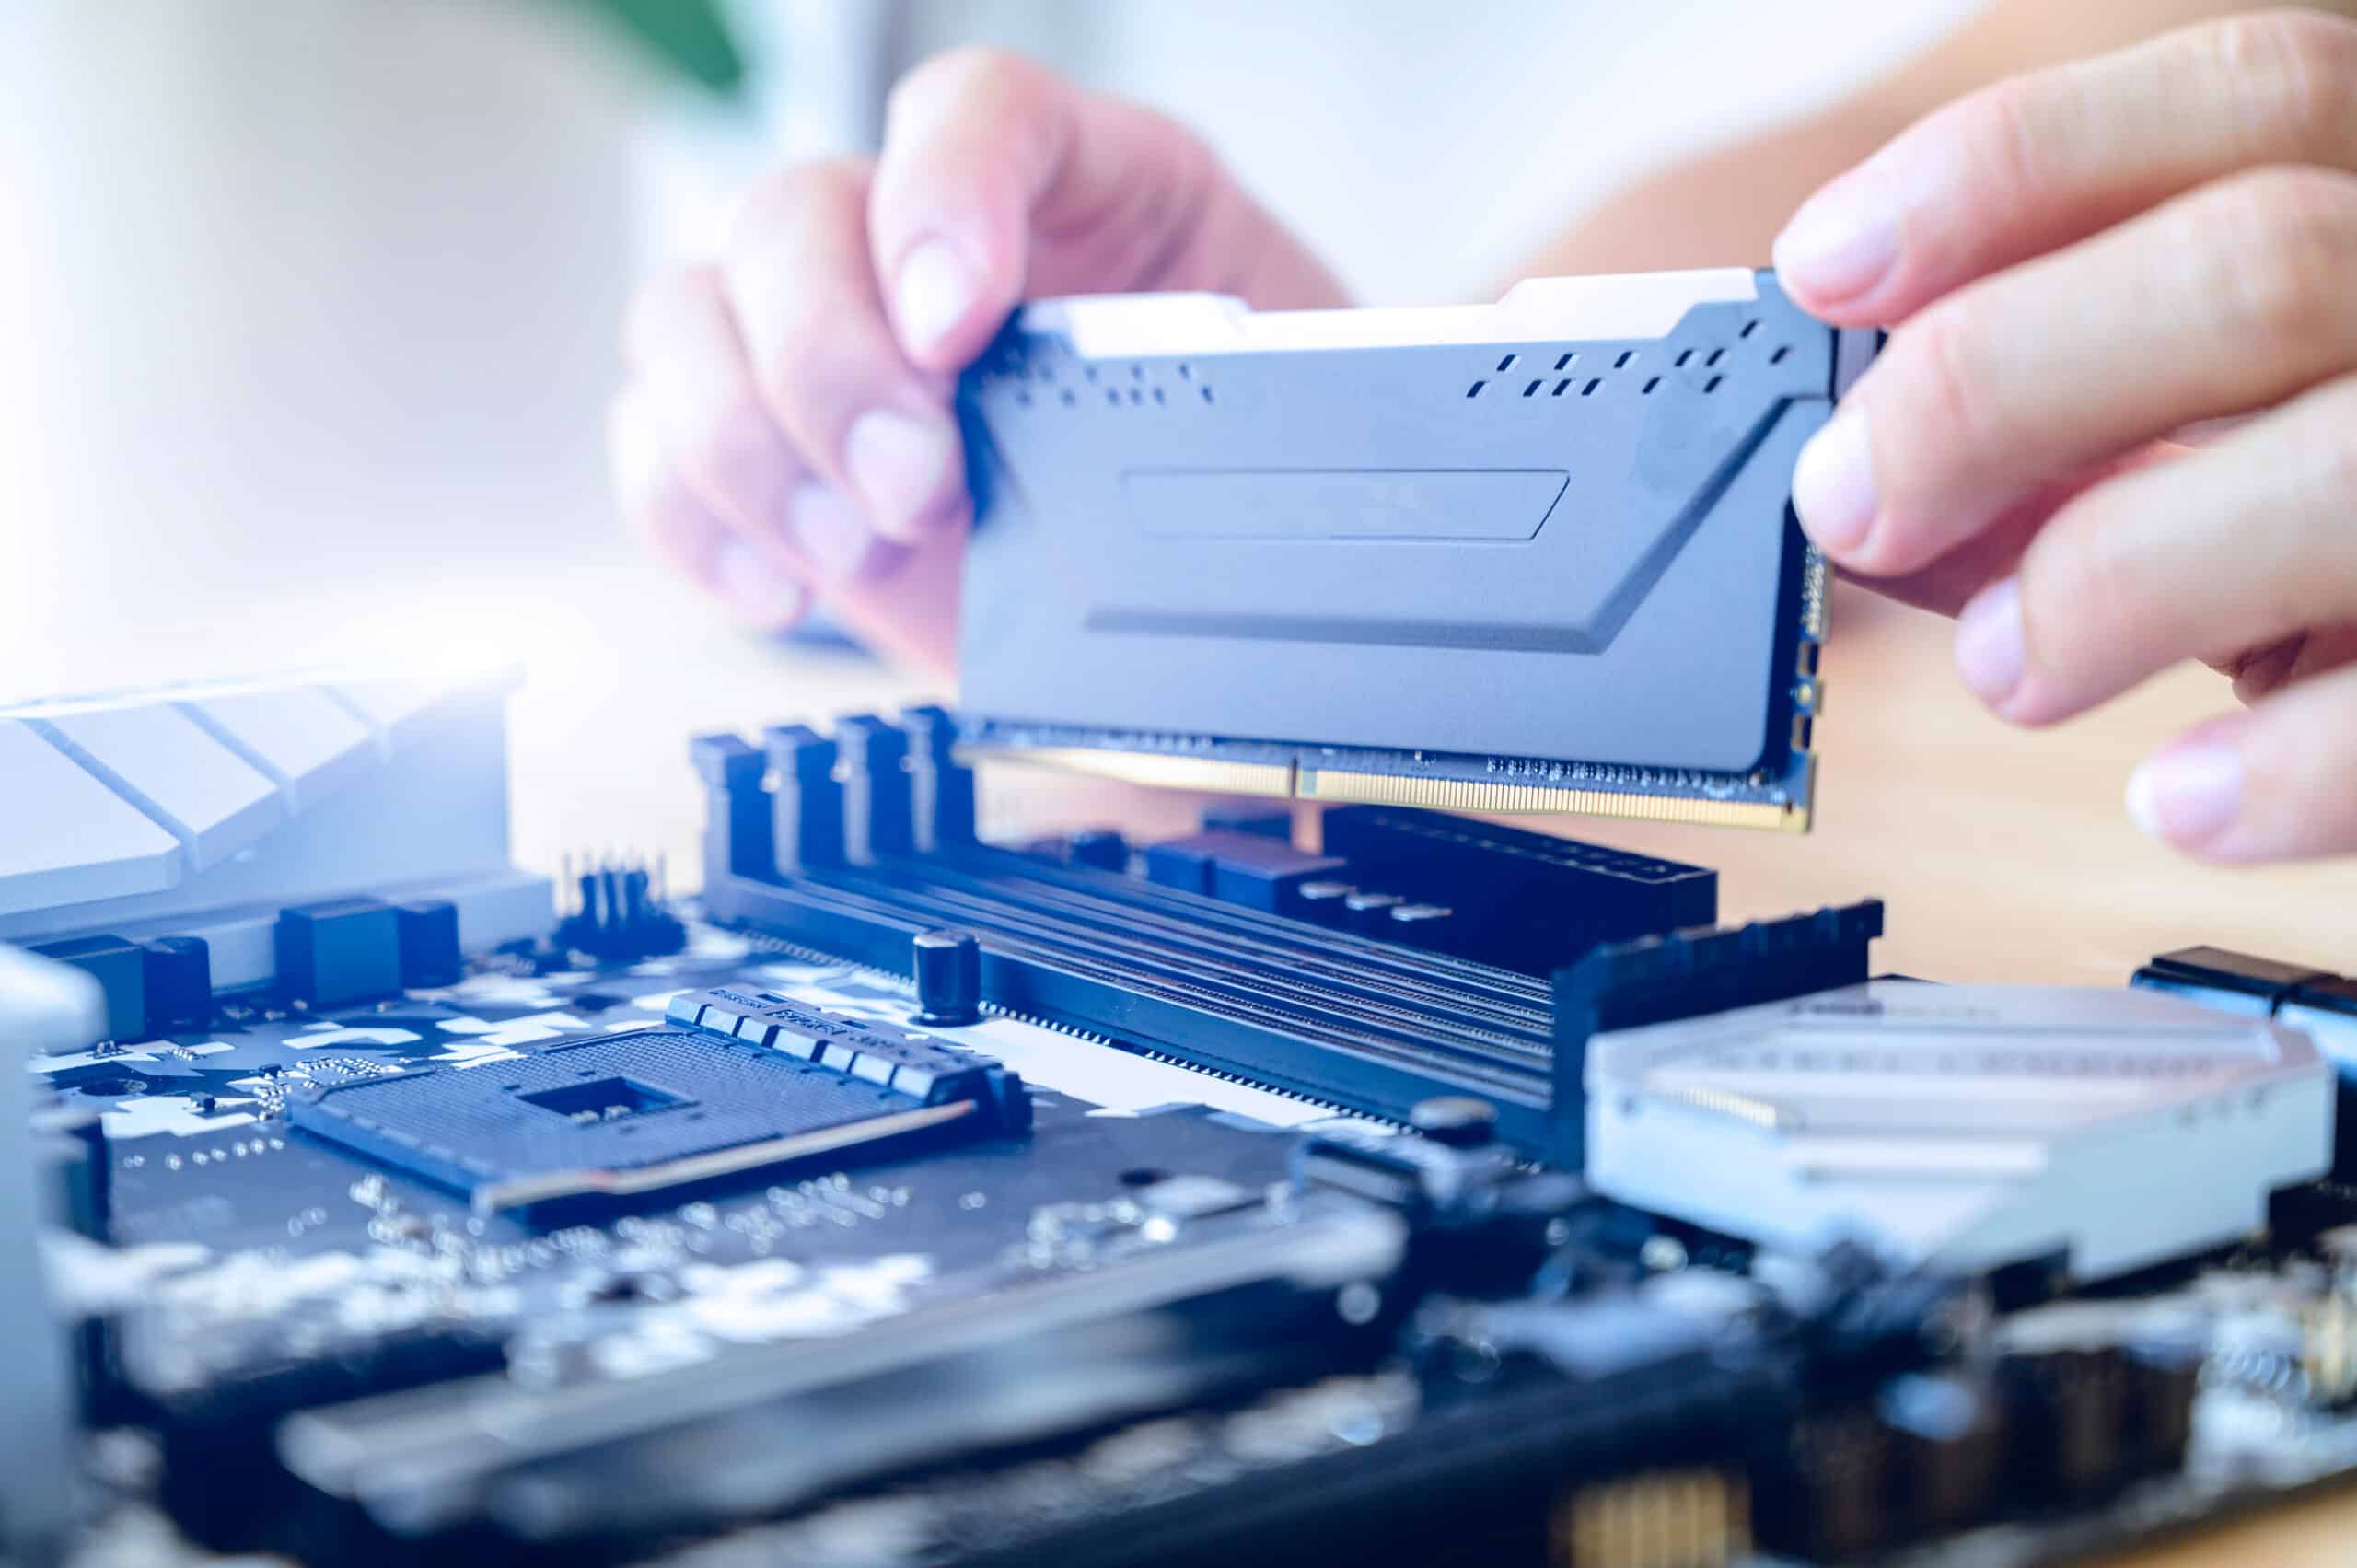 RAM in the motherboard